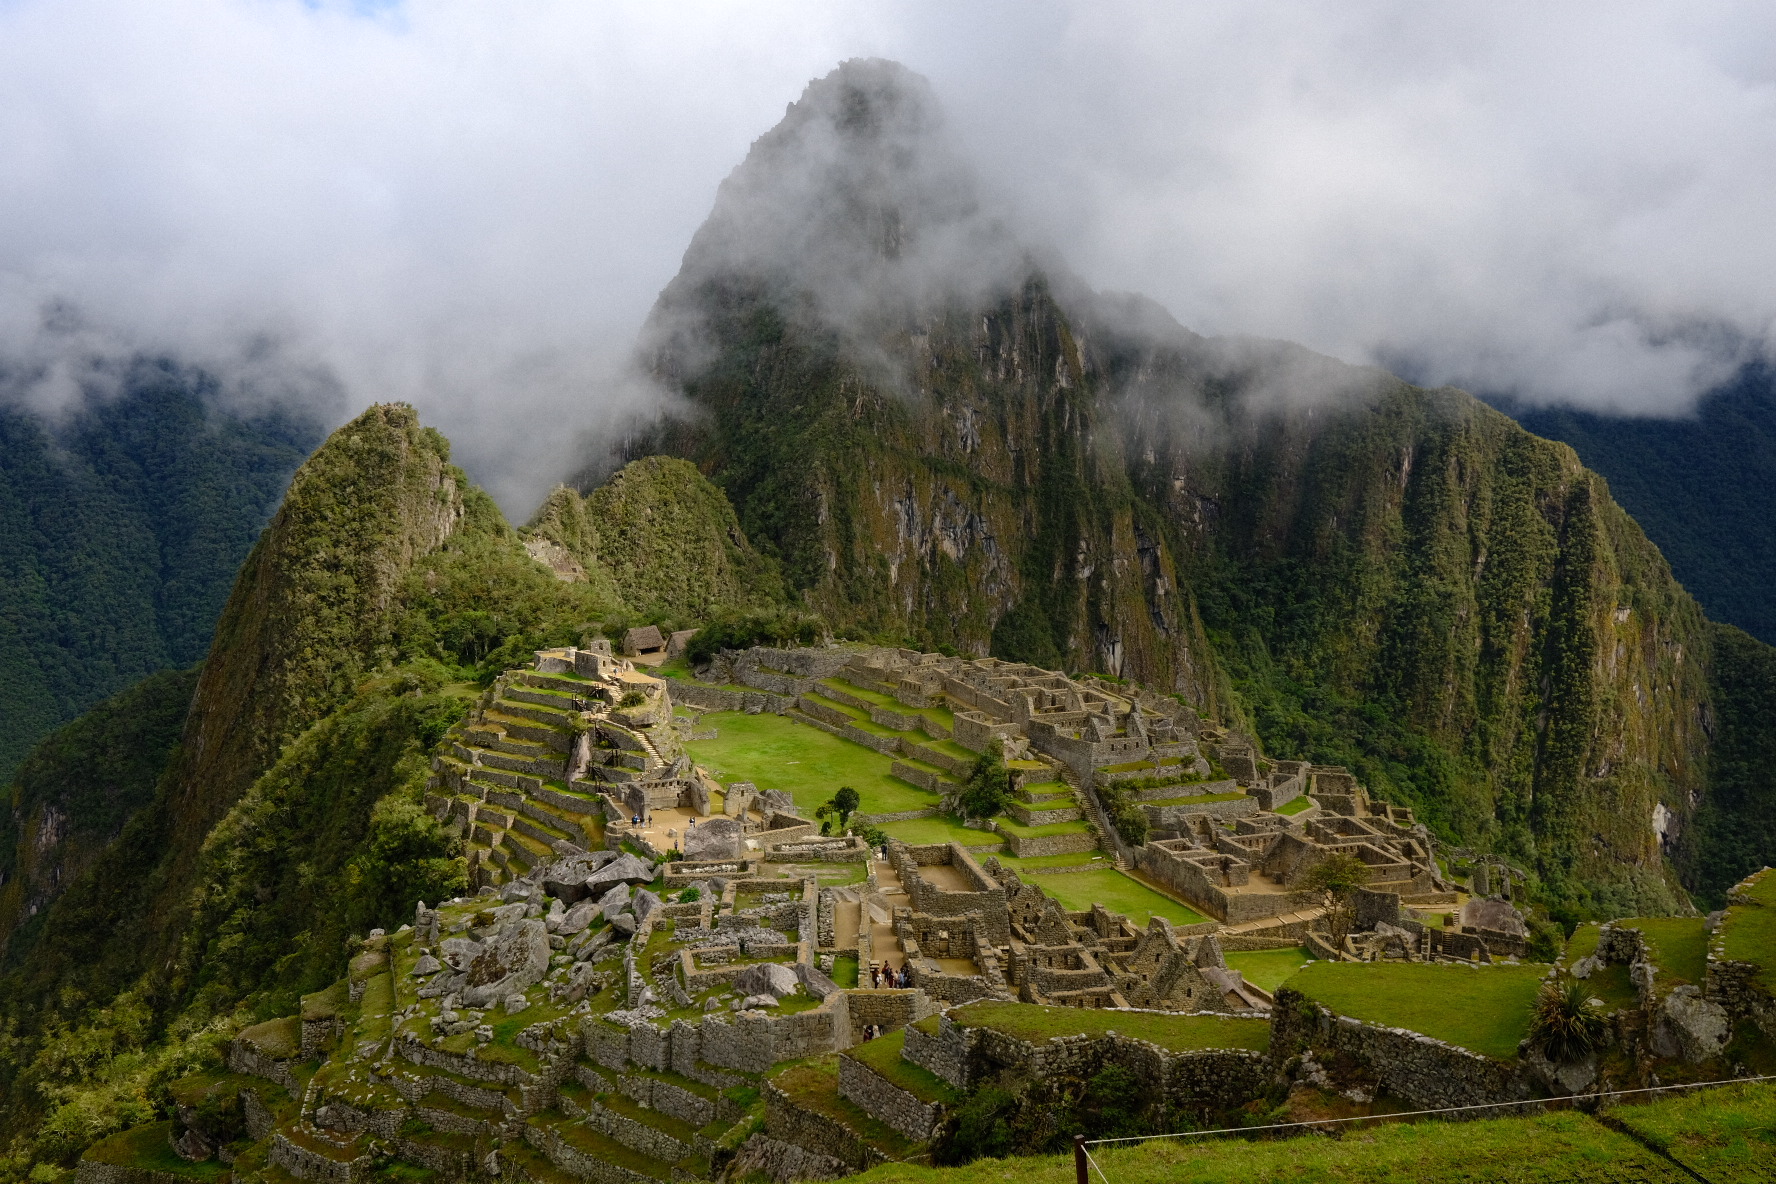 Part 3 of the 2 Amigos Adventure (Machu Picchu) - First Ascent